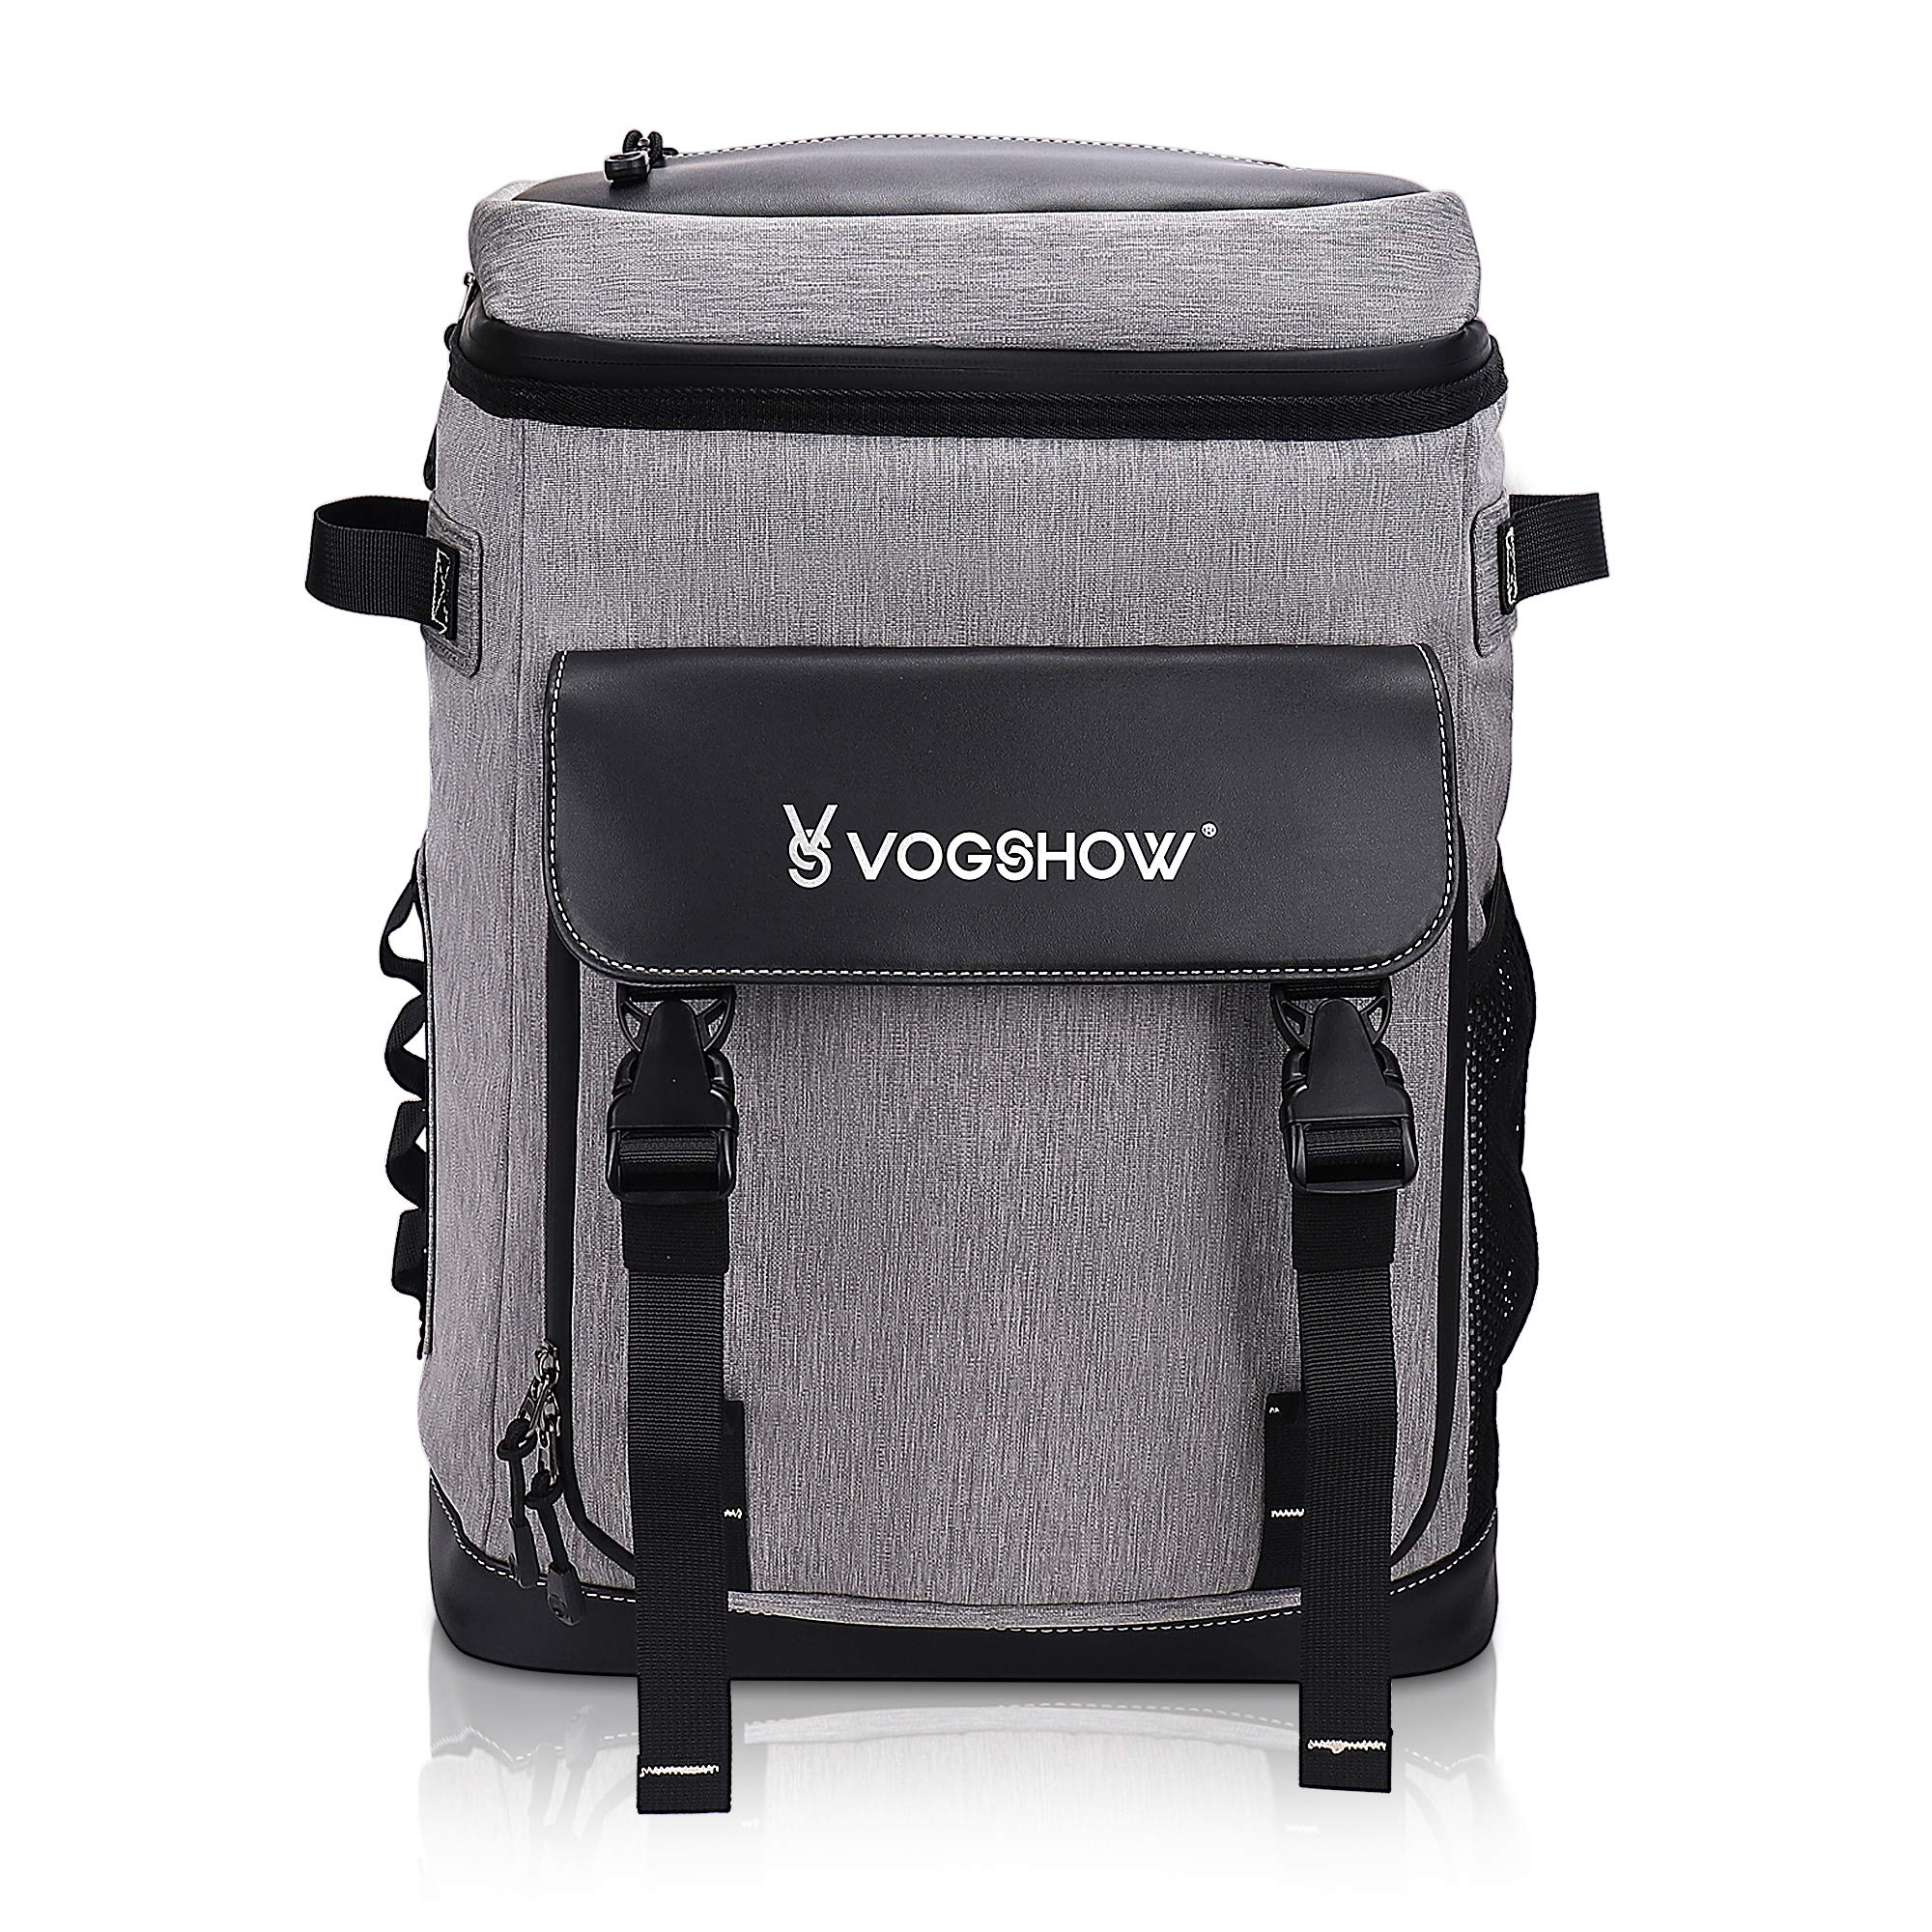 Vogshow 30L Cooler Backpack, Large Insulated Picnic Lunch Backpack, Cool Bag Multipurpose Rucksack for Camping/BBQ/Family Outdoor/Shopping/Travelling/Beach/Fishing